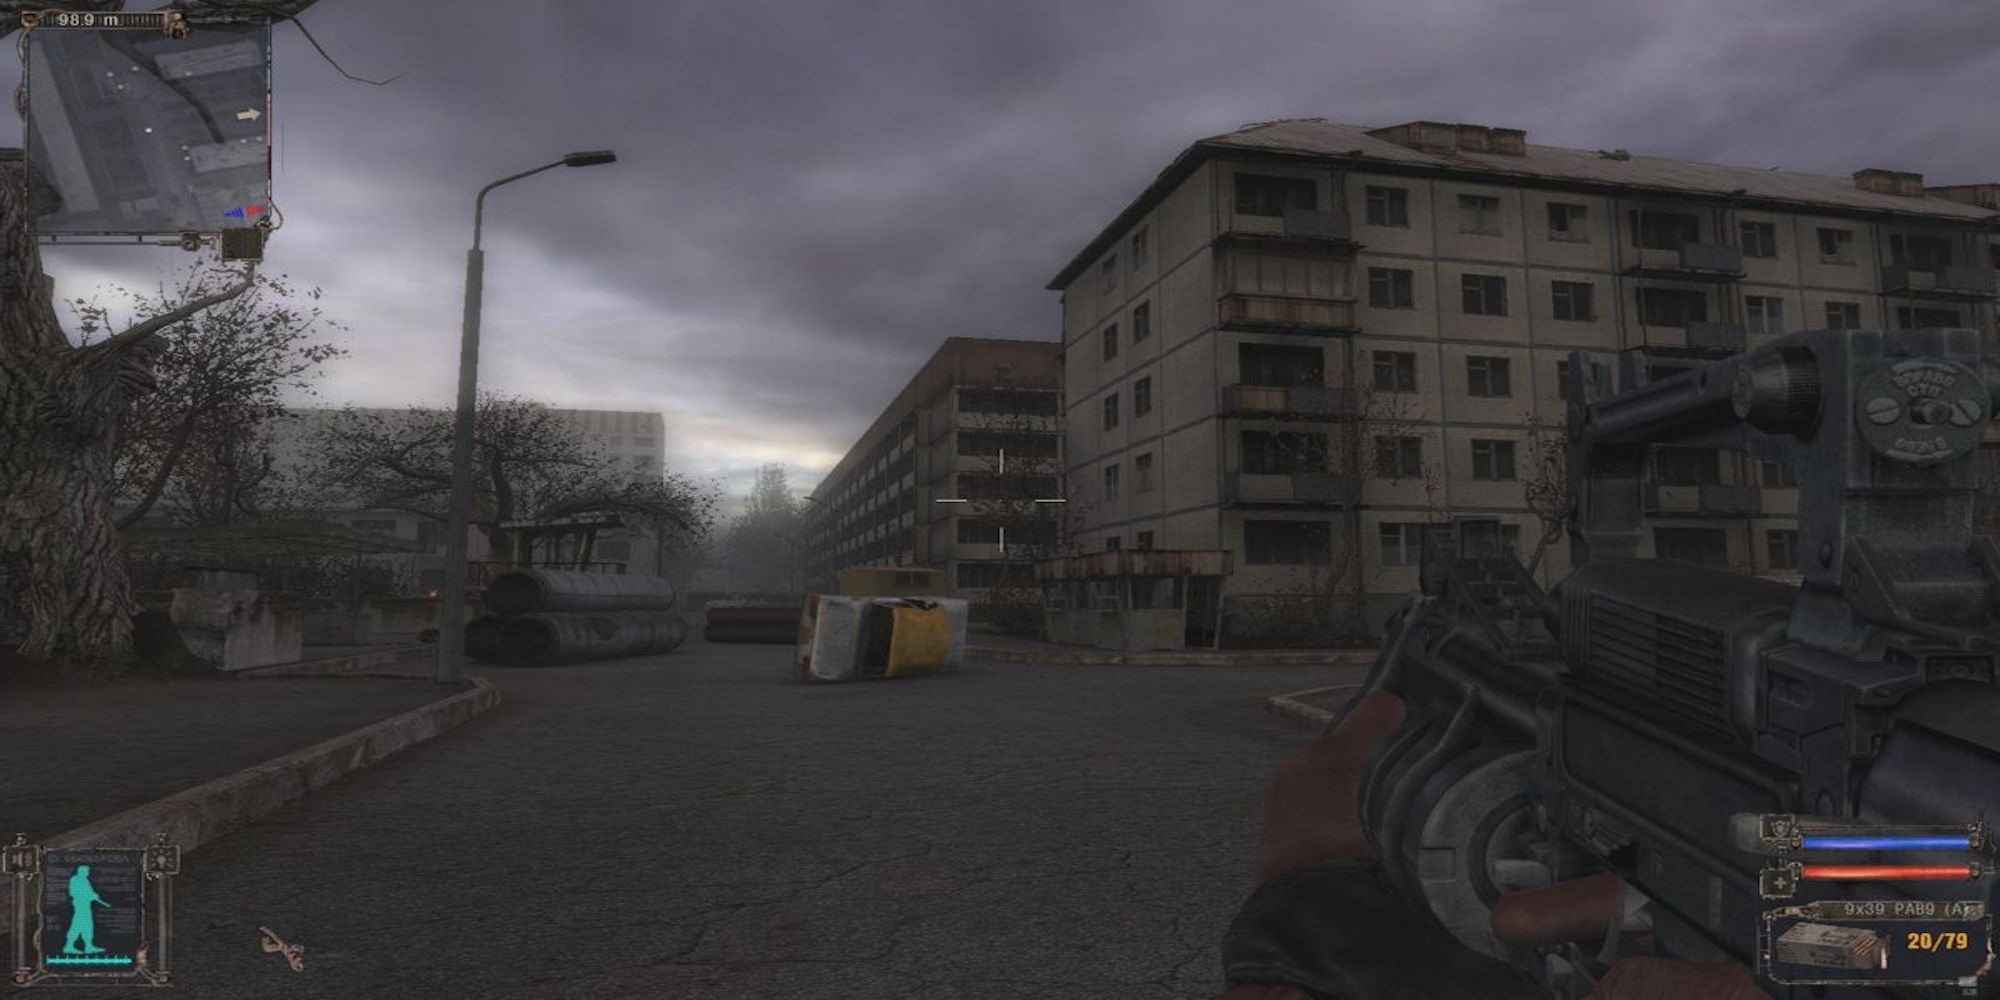 Player walking through an isolated city (Stalker: The Shadow of Chernobyl)